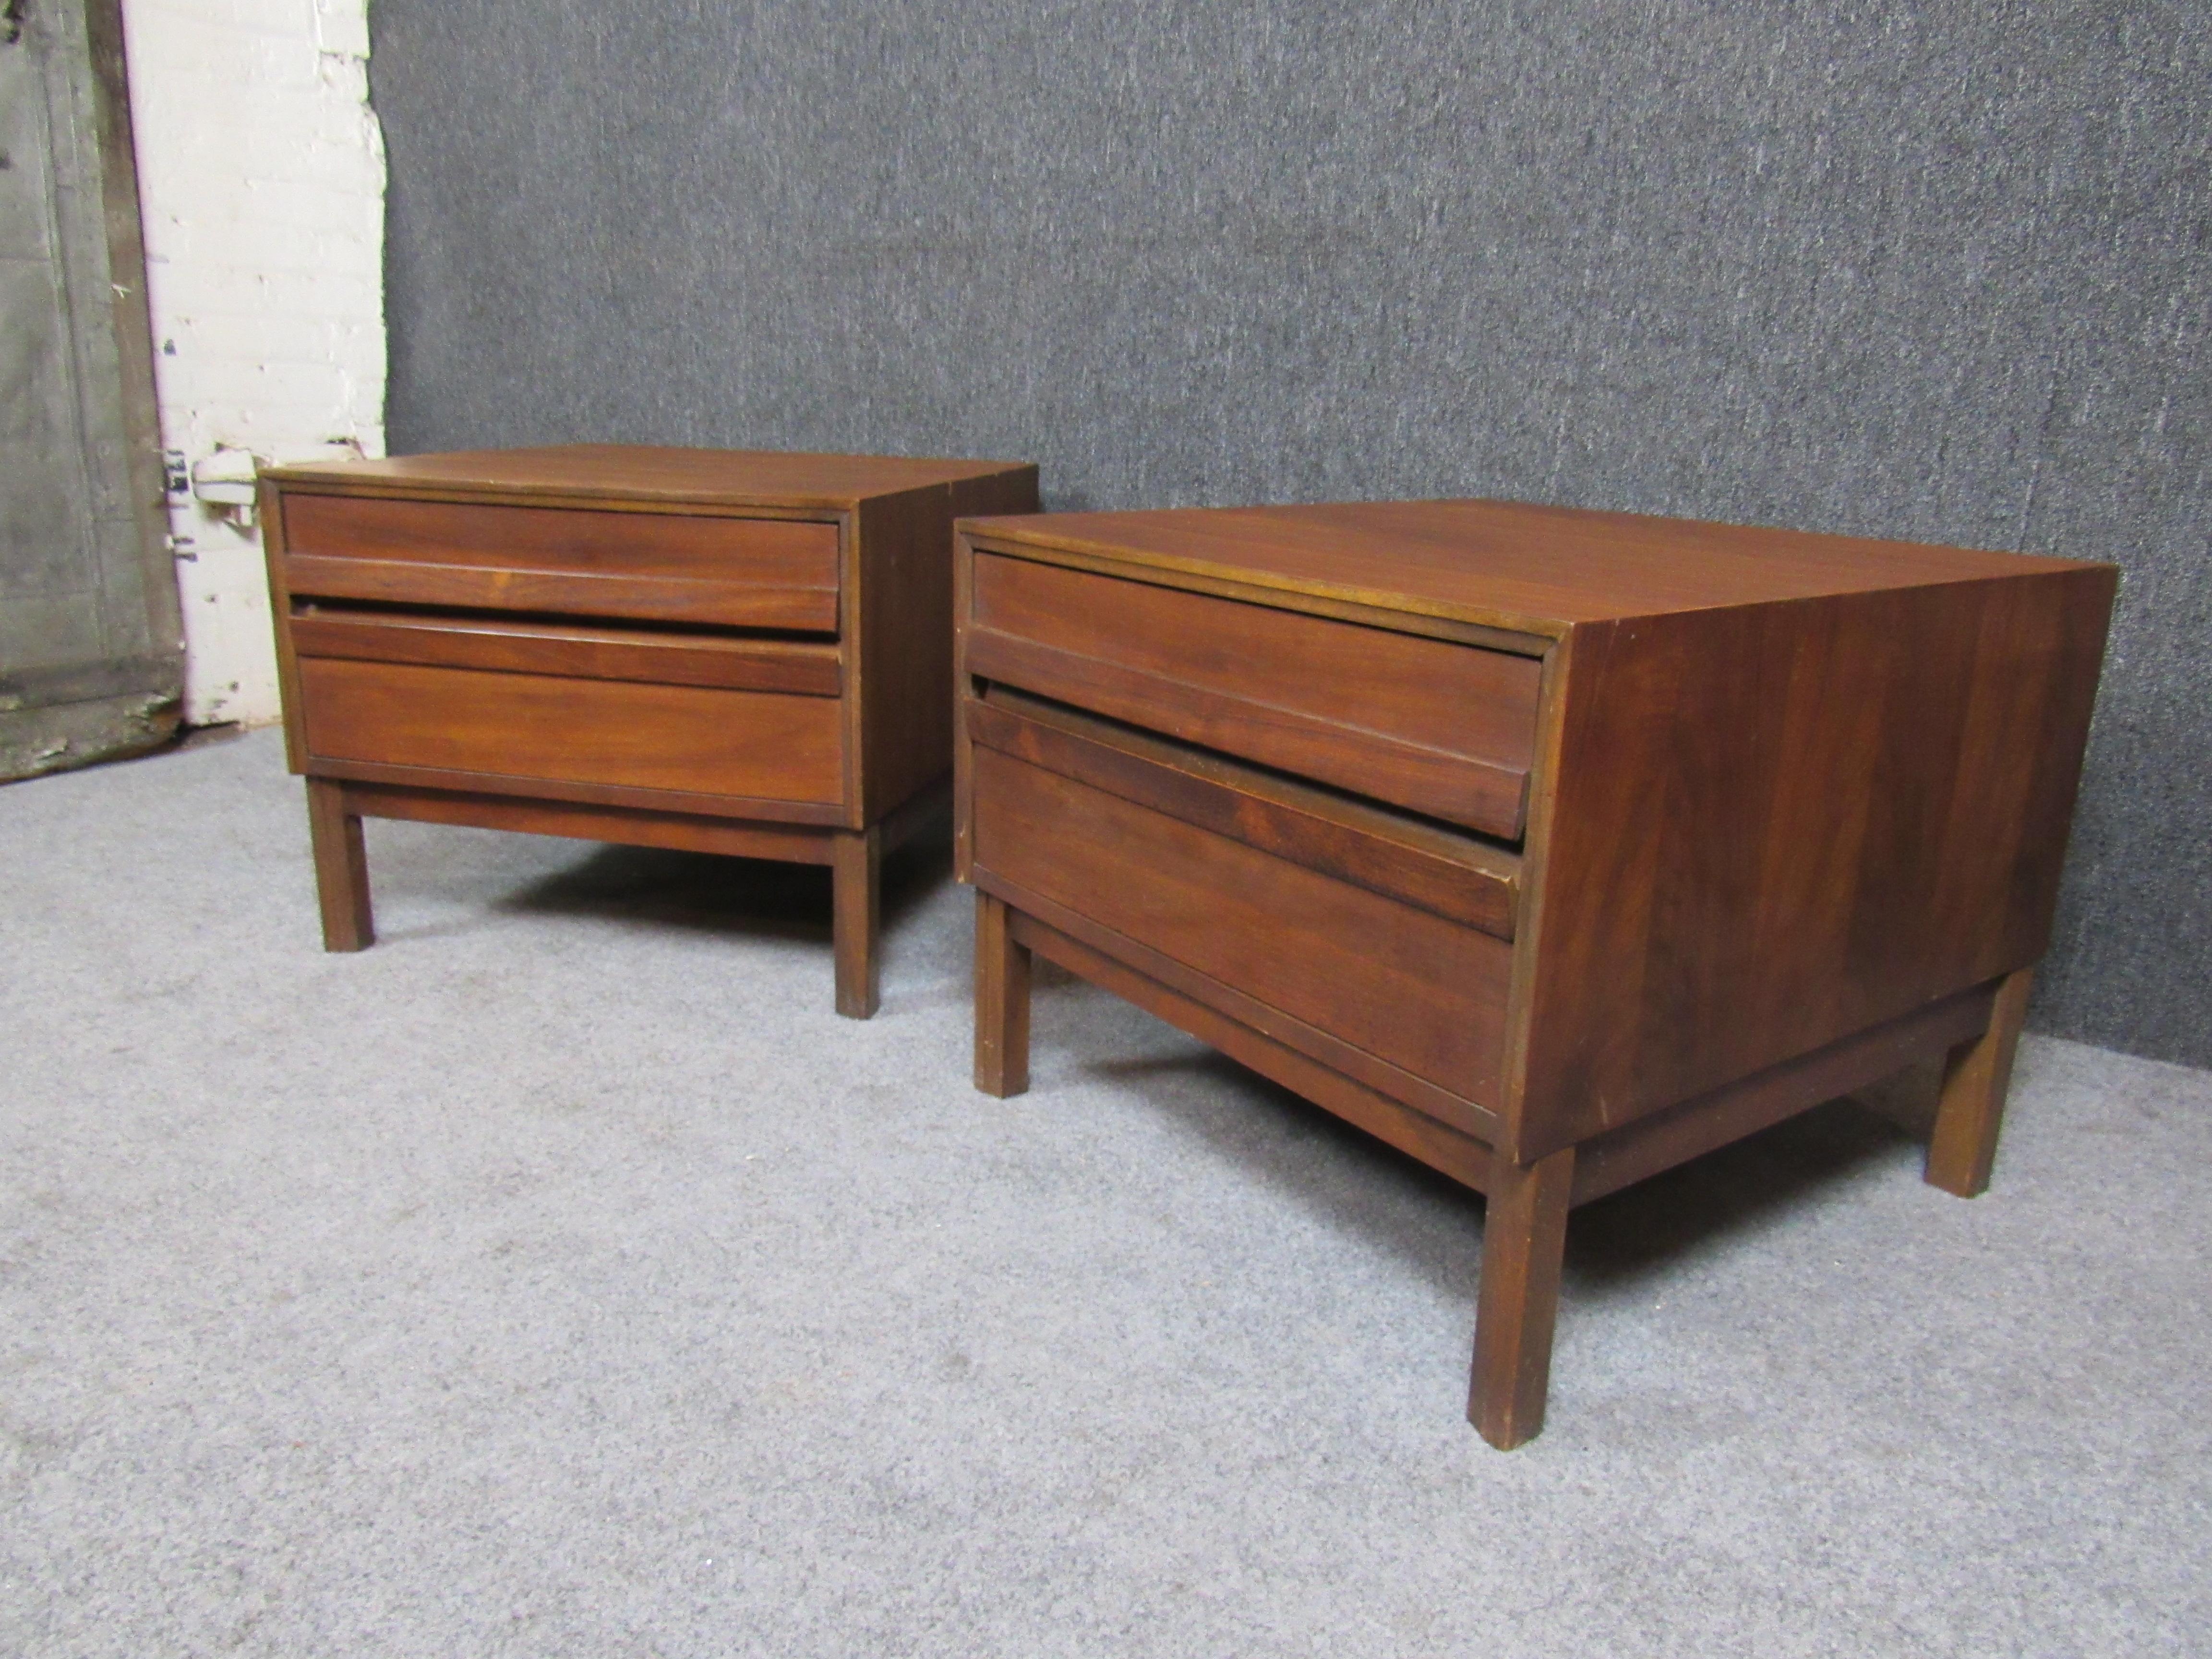 Bring home the form and function that has put mid-century modern at the top of the furniture world! Sleek, yet robust, these walnut end tables feature a rich warm wood grain and ample tops. A pair of large drawers creates plentiful storage